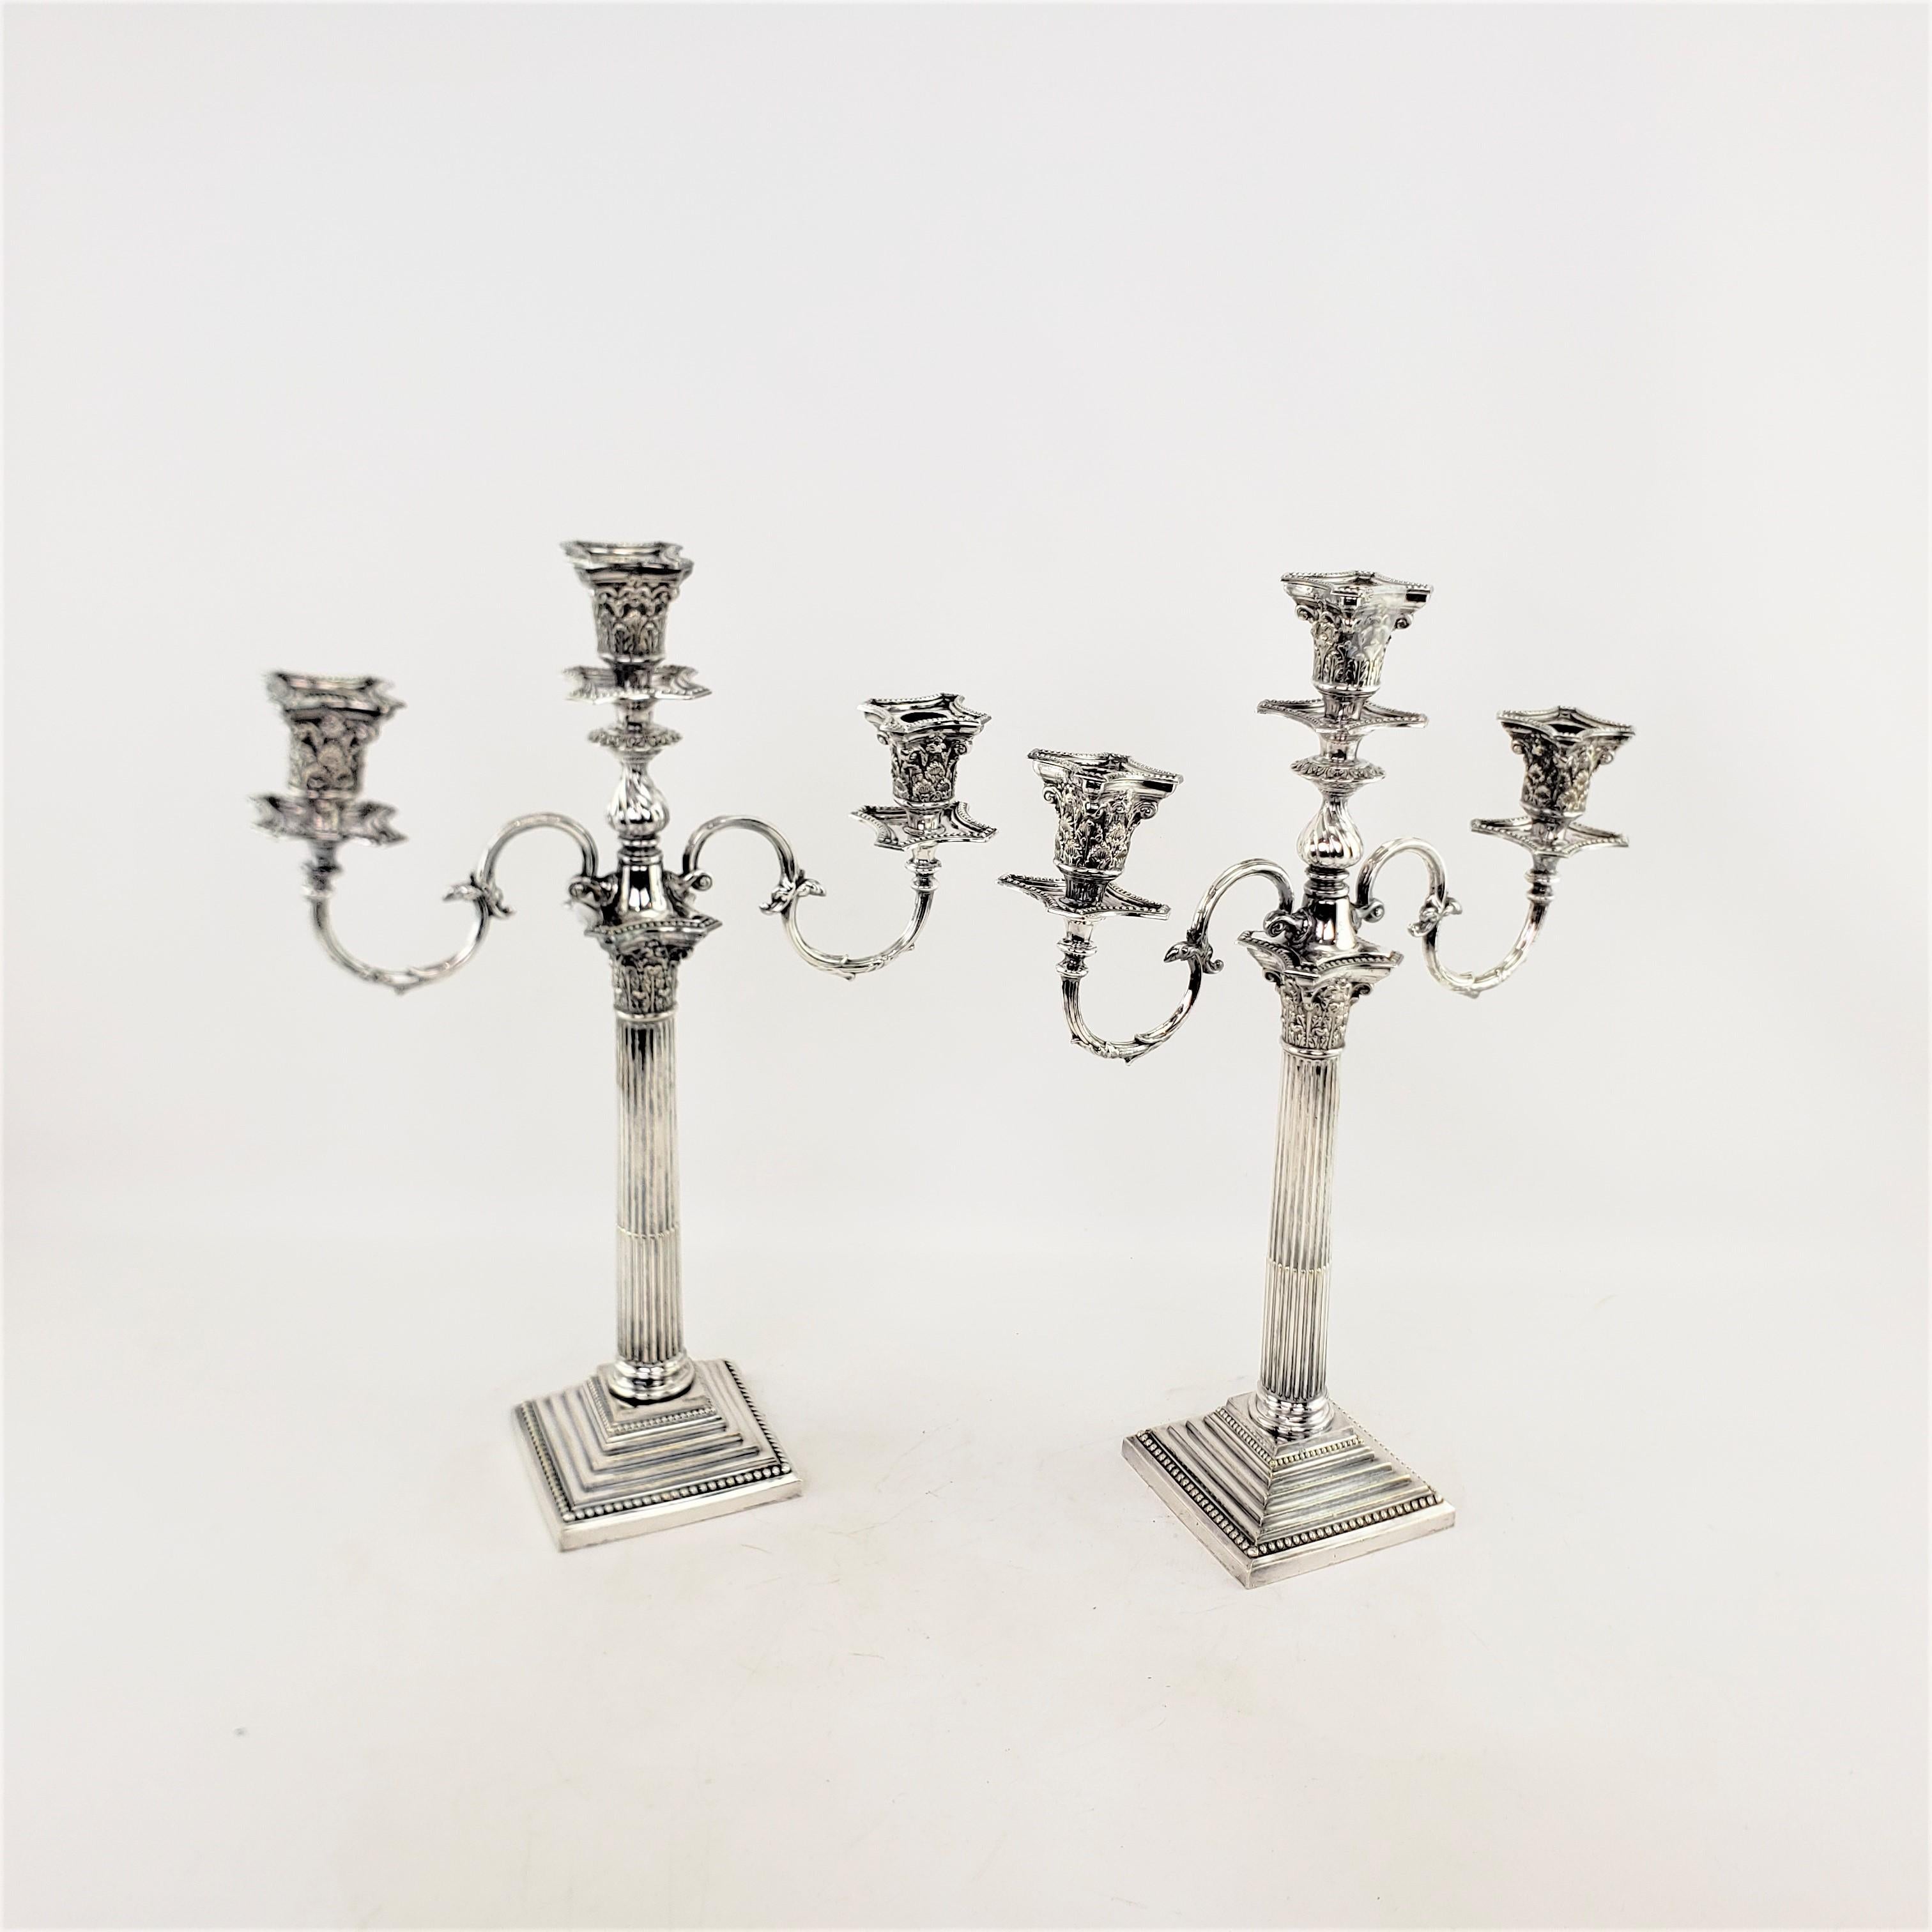 This pair of antique convertible candelabras were made by the well known Mappin & Webb of England in approximately 1920 in a Classical Greek Revival style. These candelabras are composed of silver plate and are ornately cast with an Ancient Greek